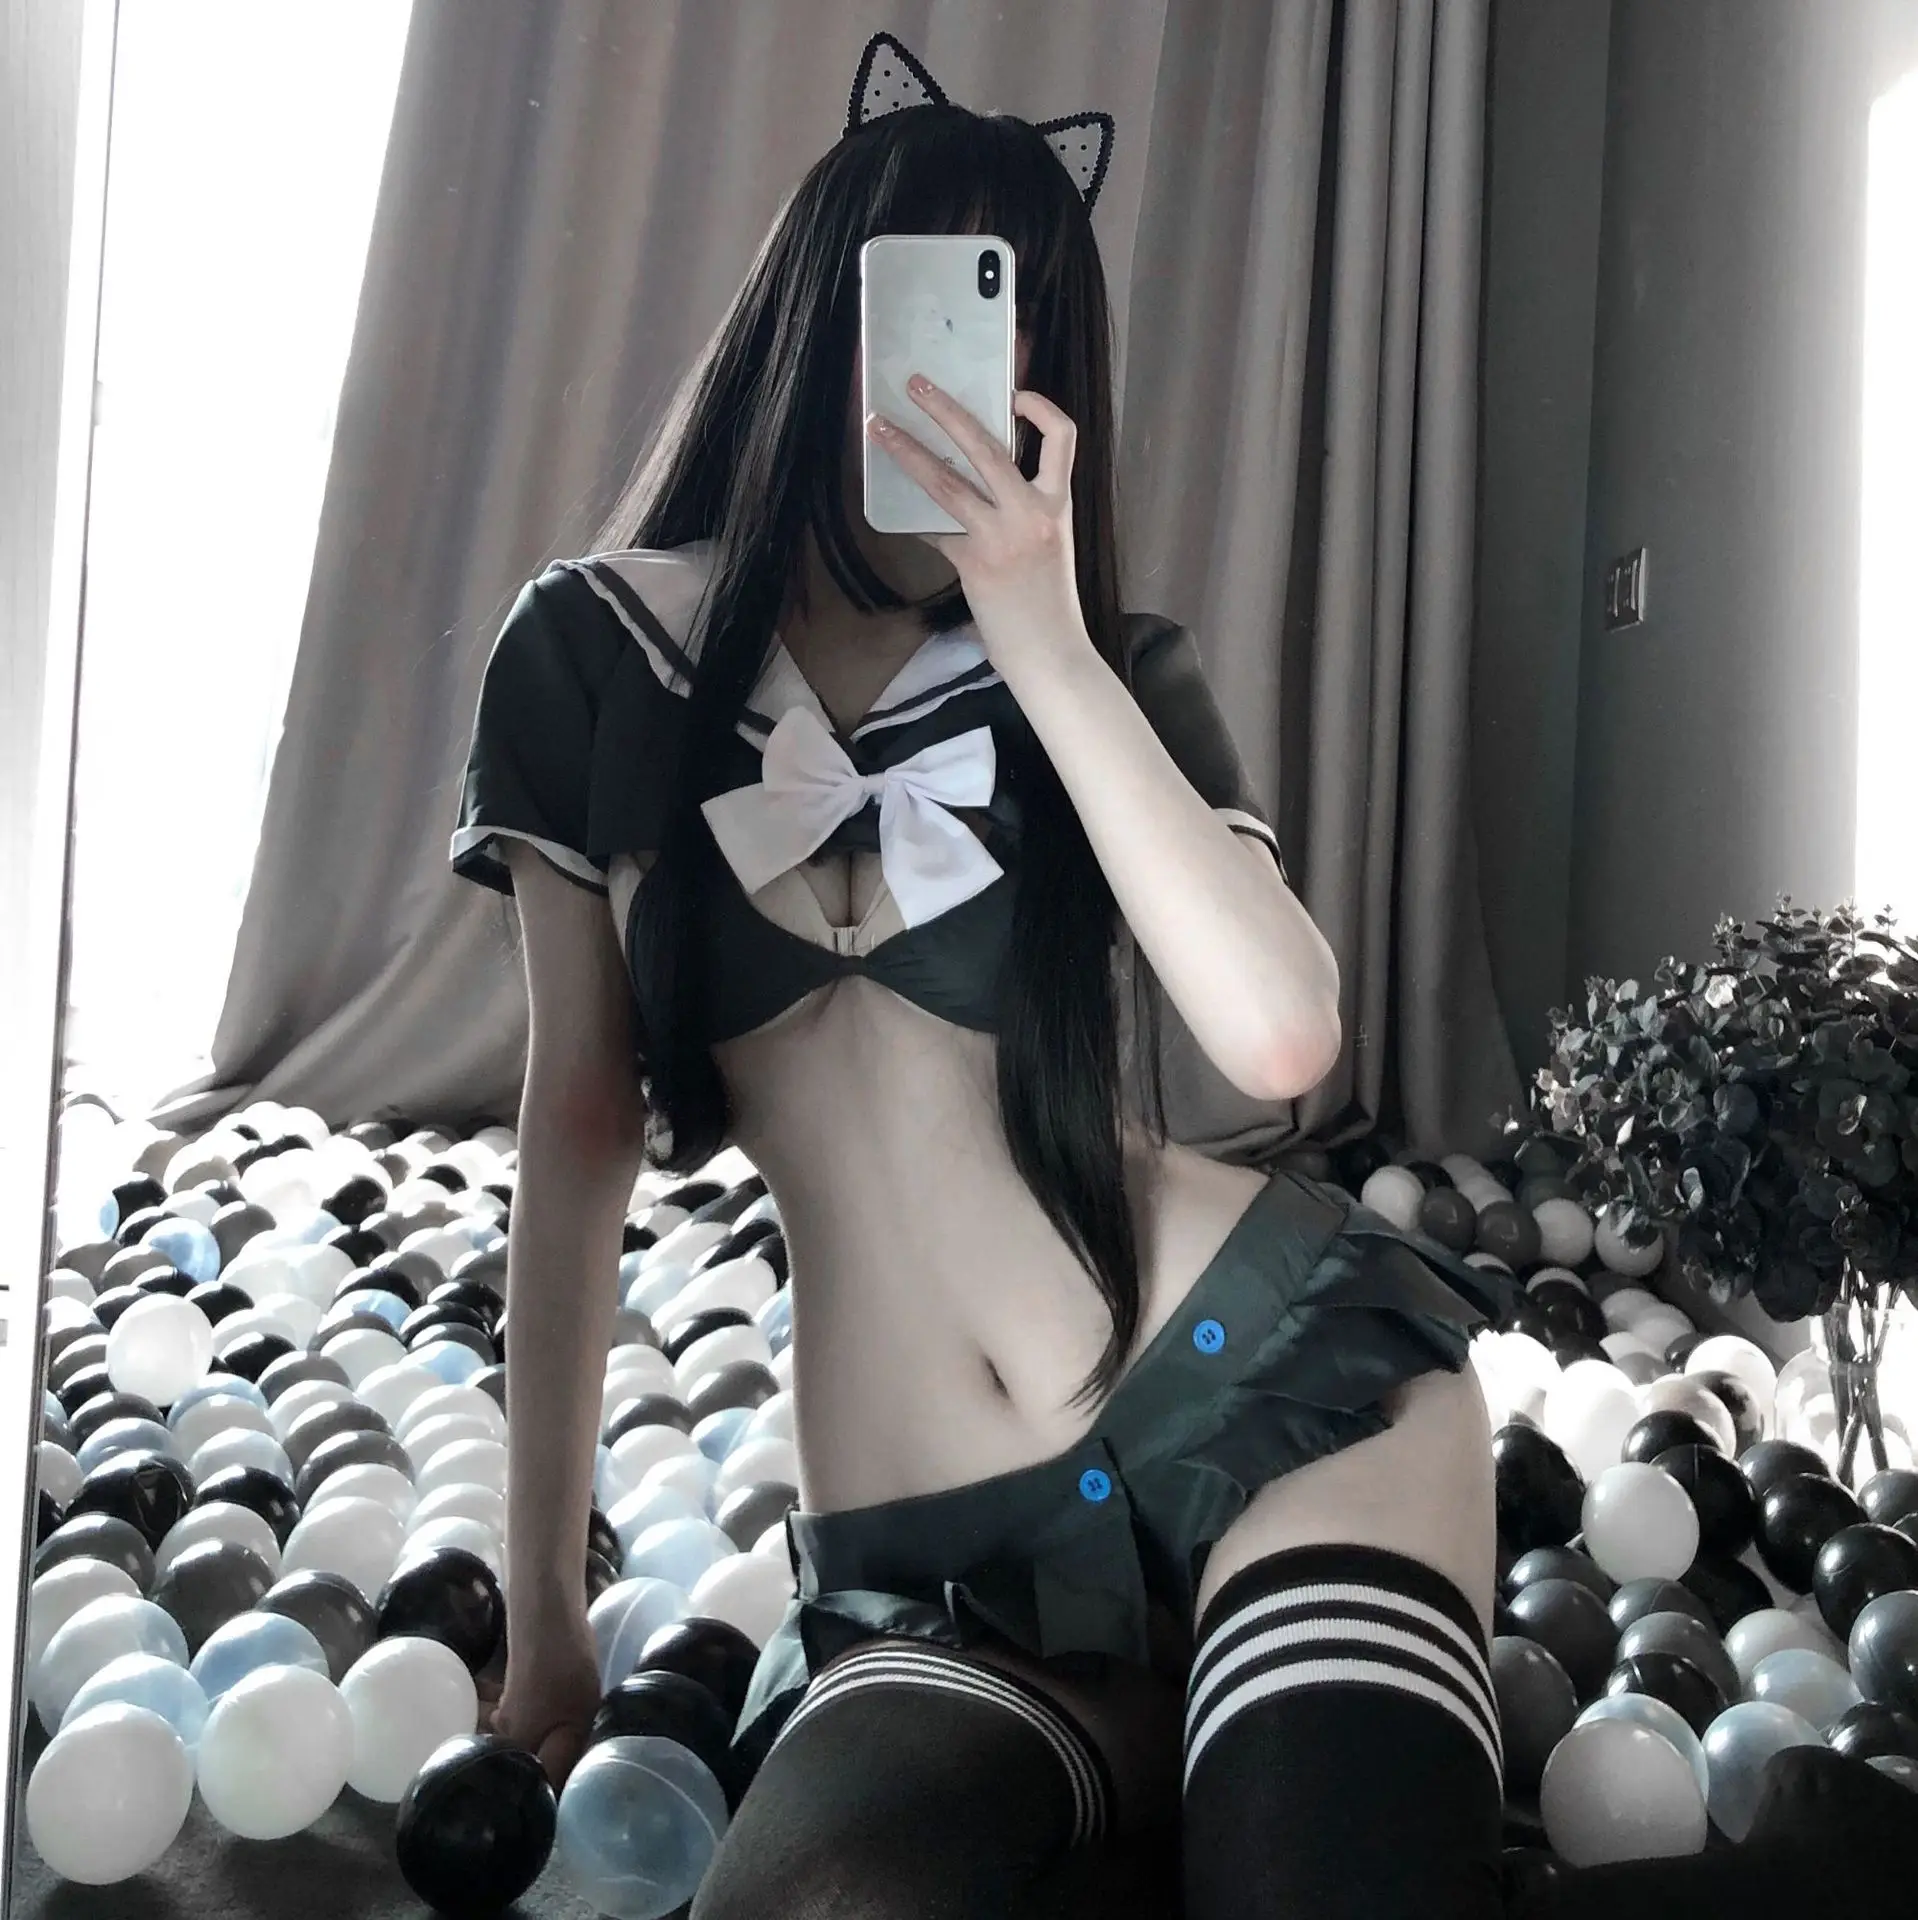 School Girl Costumes Students Uniform Cosplay Porno Women Sexy Lingerie Outfit Cheerleader Mini Skirt Erotic Sex Dress - Exotic Costumes